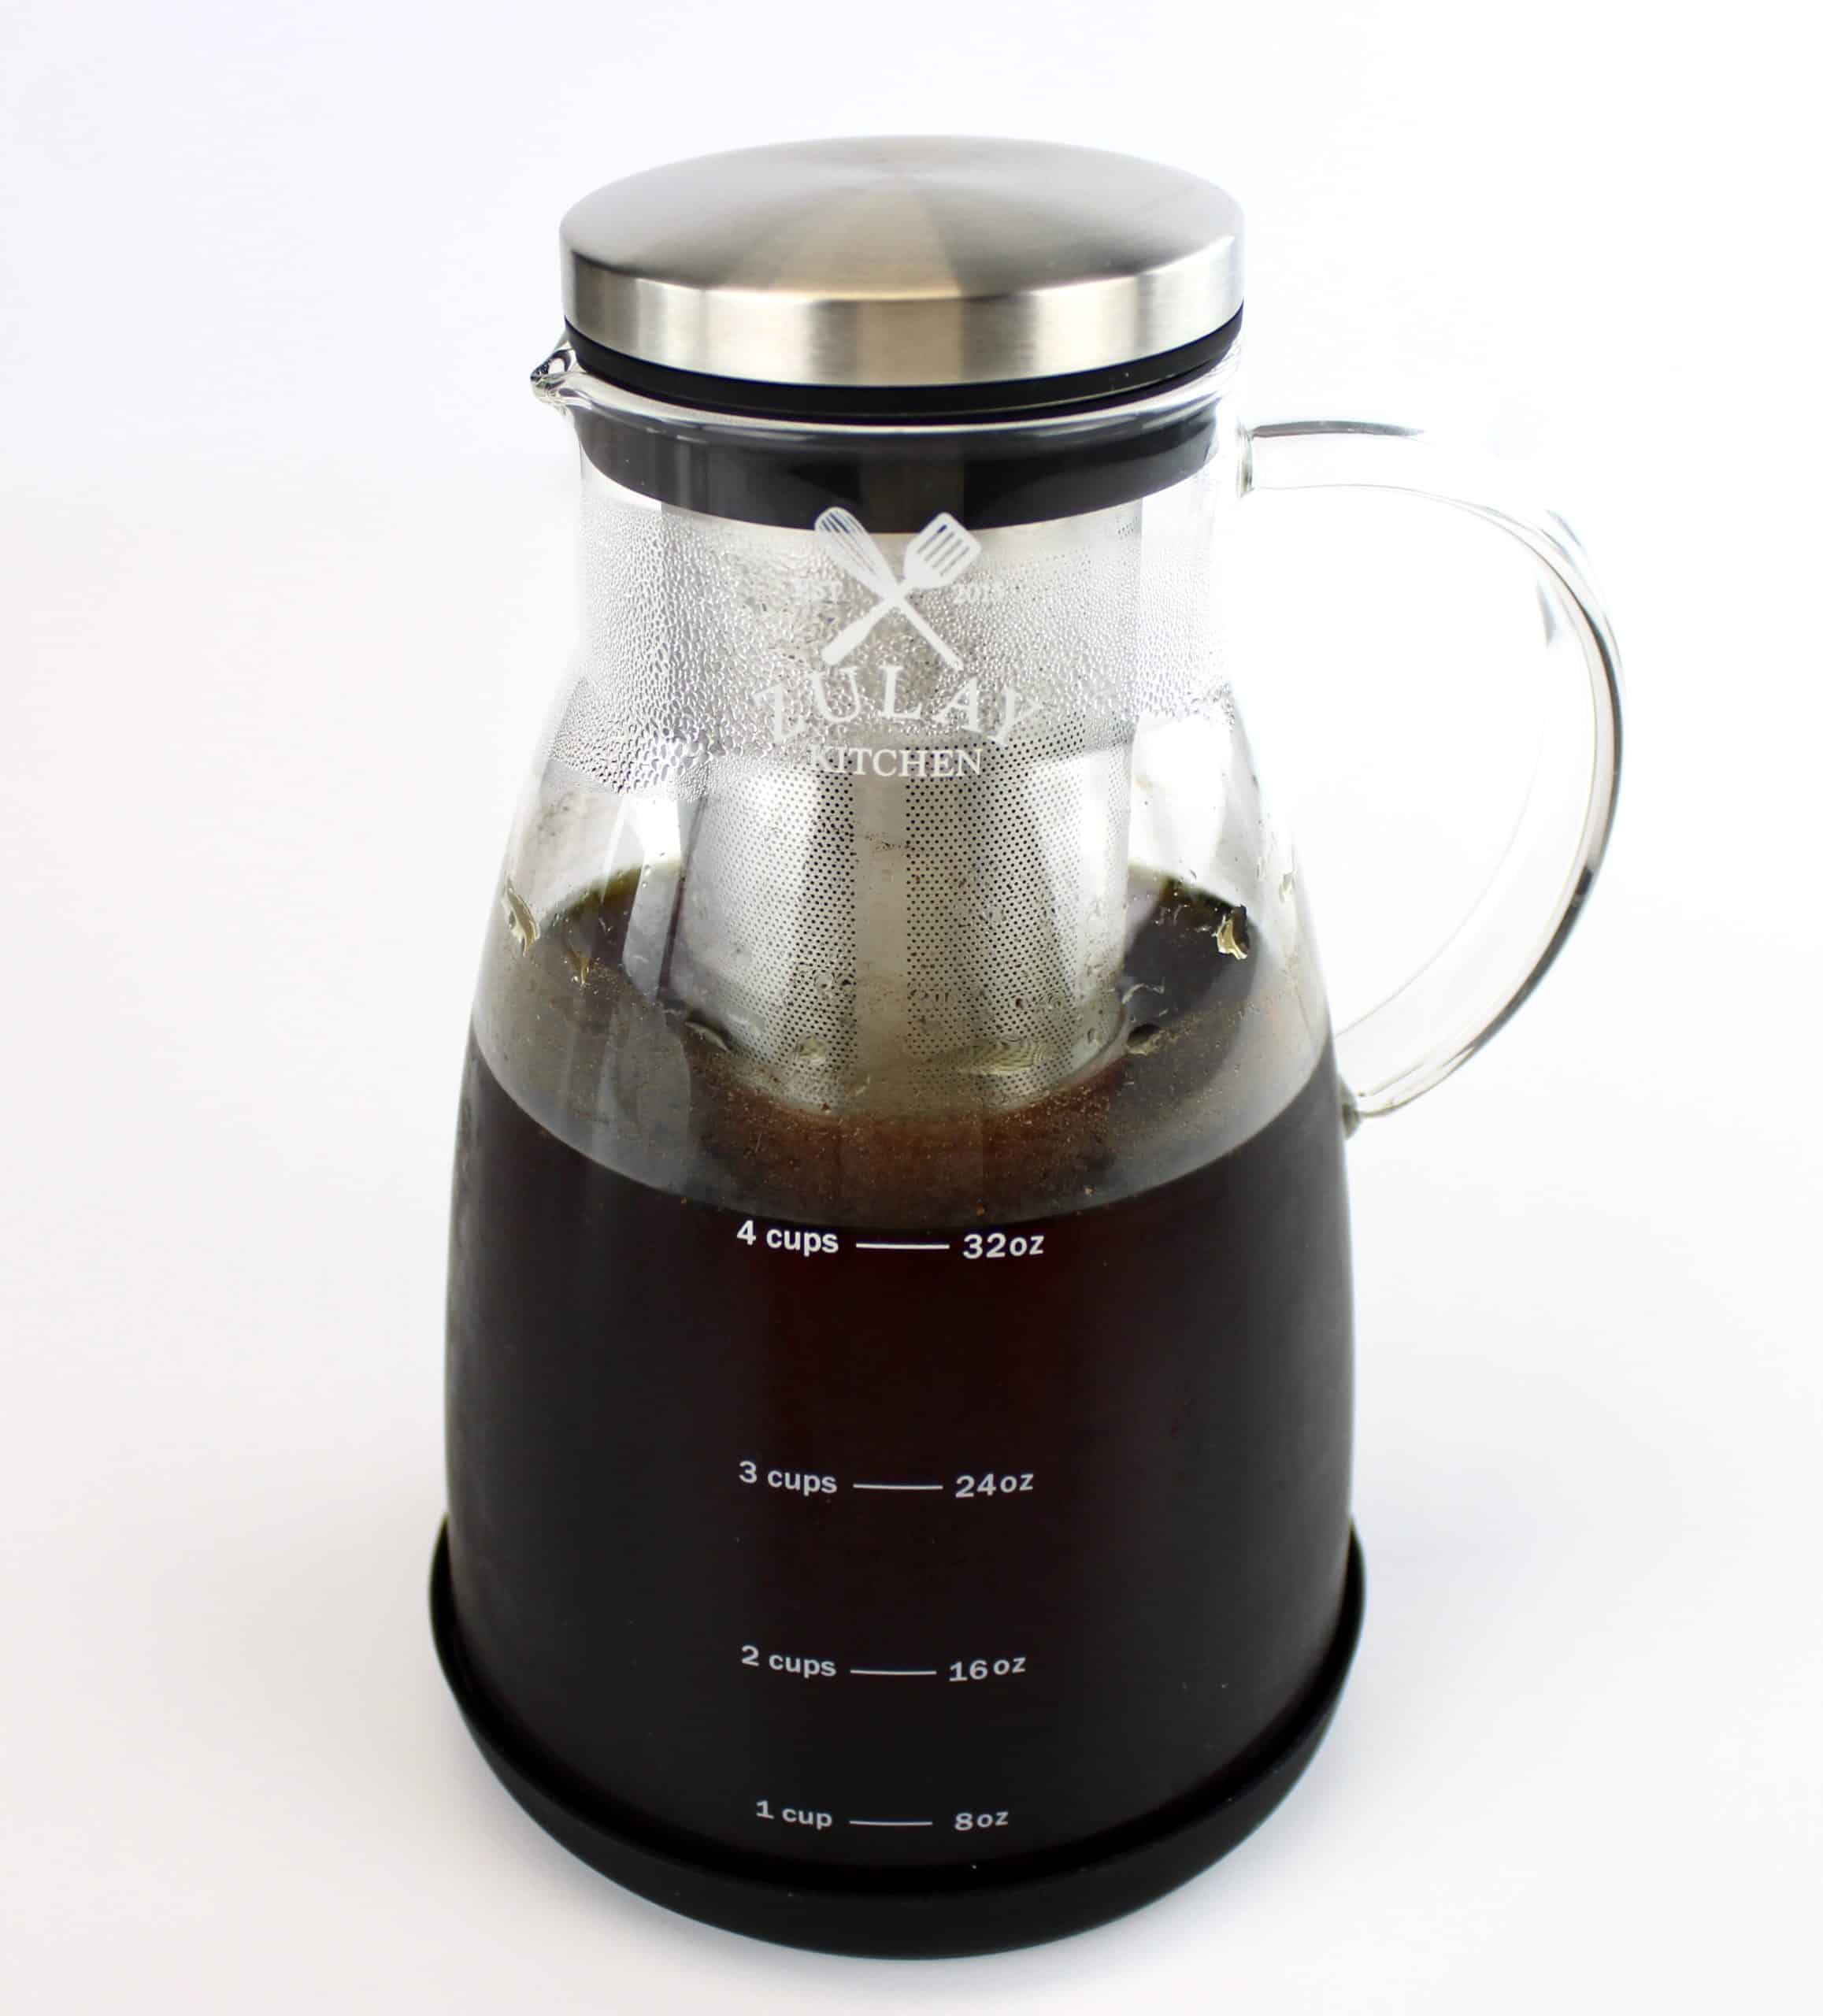 https://ketocookingchristian.com/wp-content/uploads/2022/12/Cold-Brew-Coffee6-scaled.jpeg